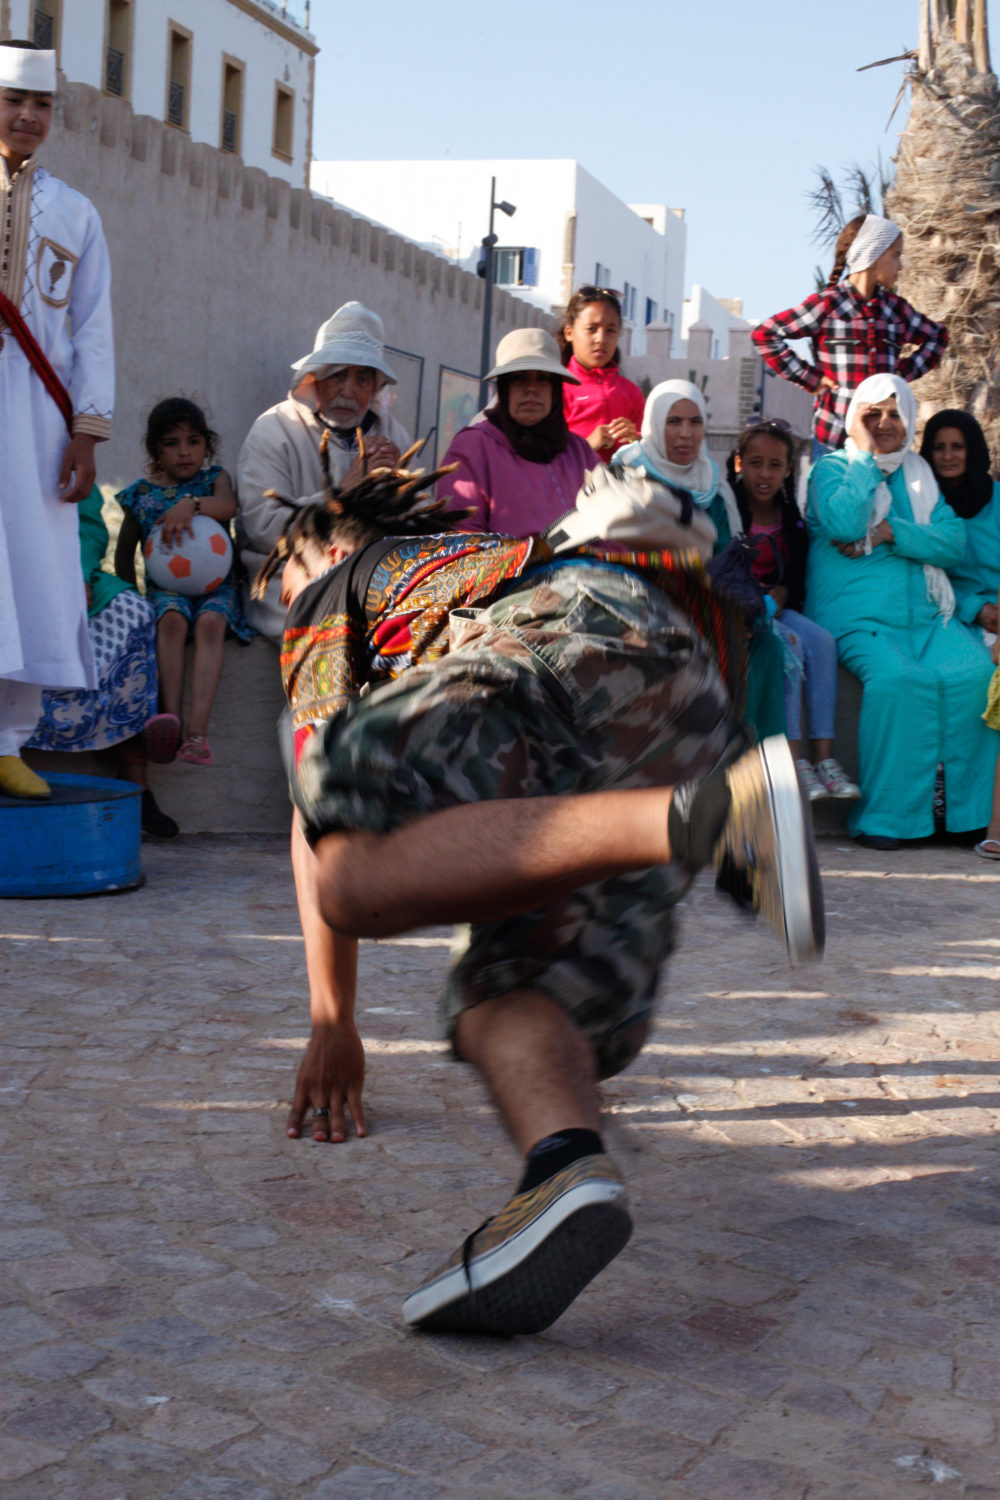 A breakdancer gets down to ahwach